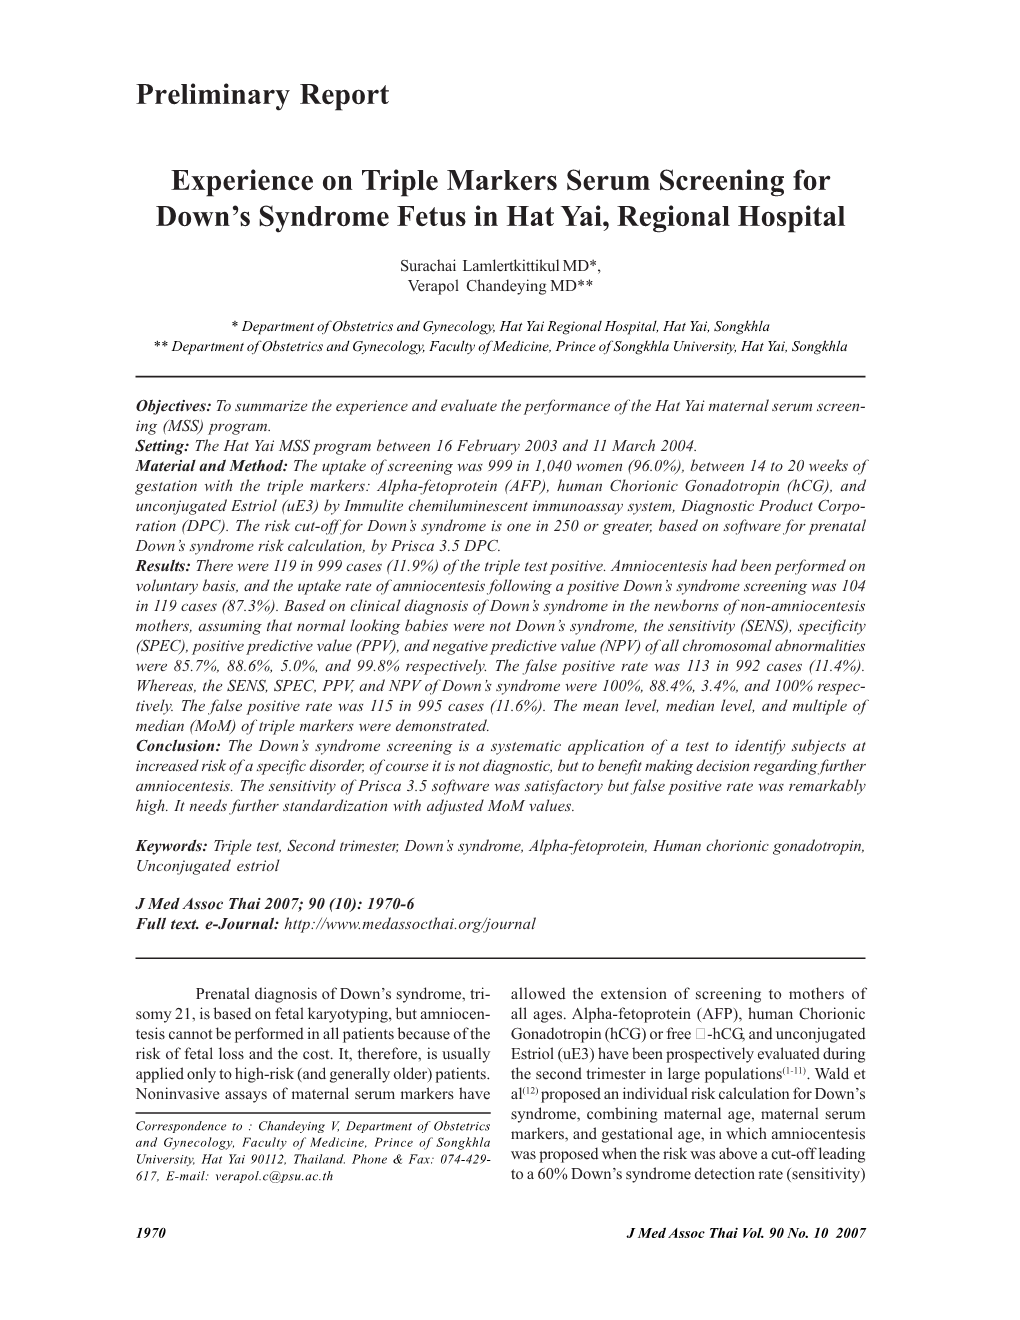 Experience on Triple Markers Serum Screening for Down's Syndrome